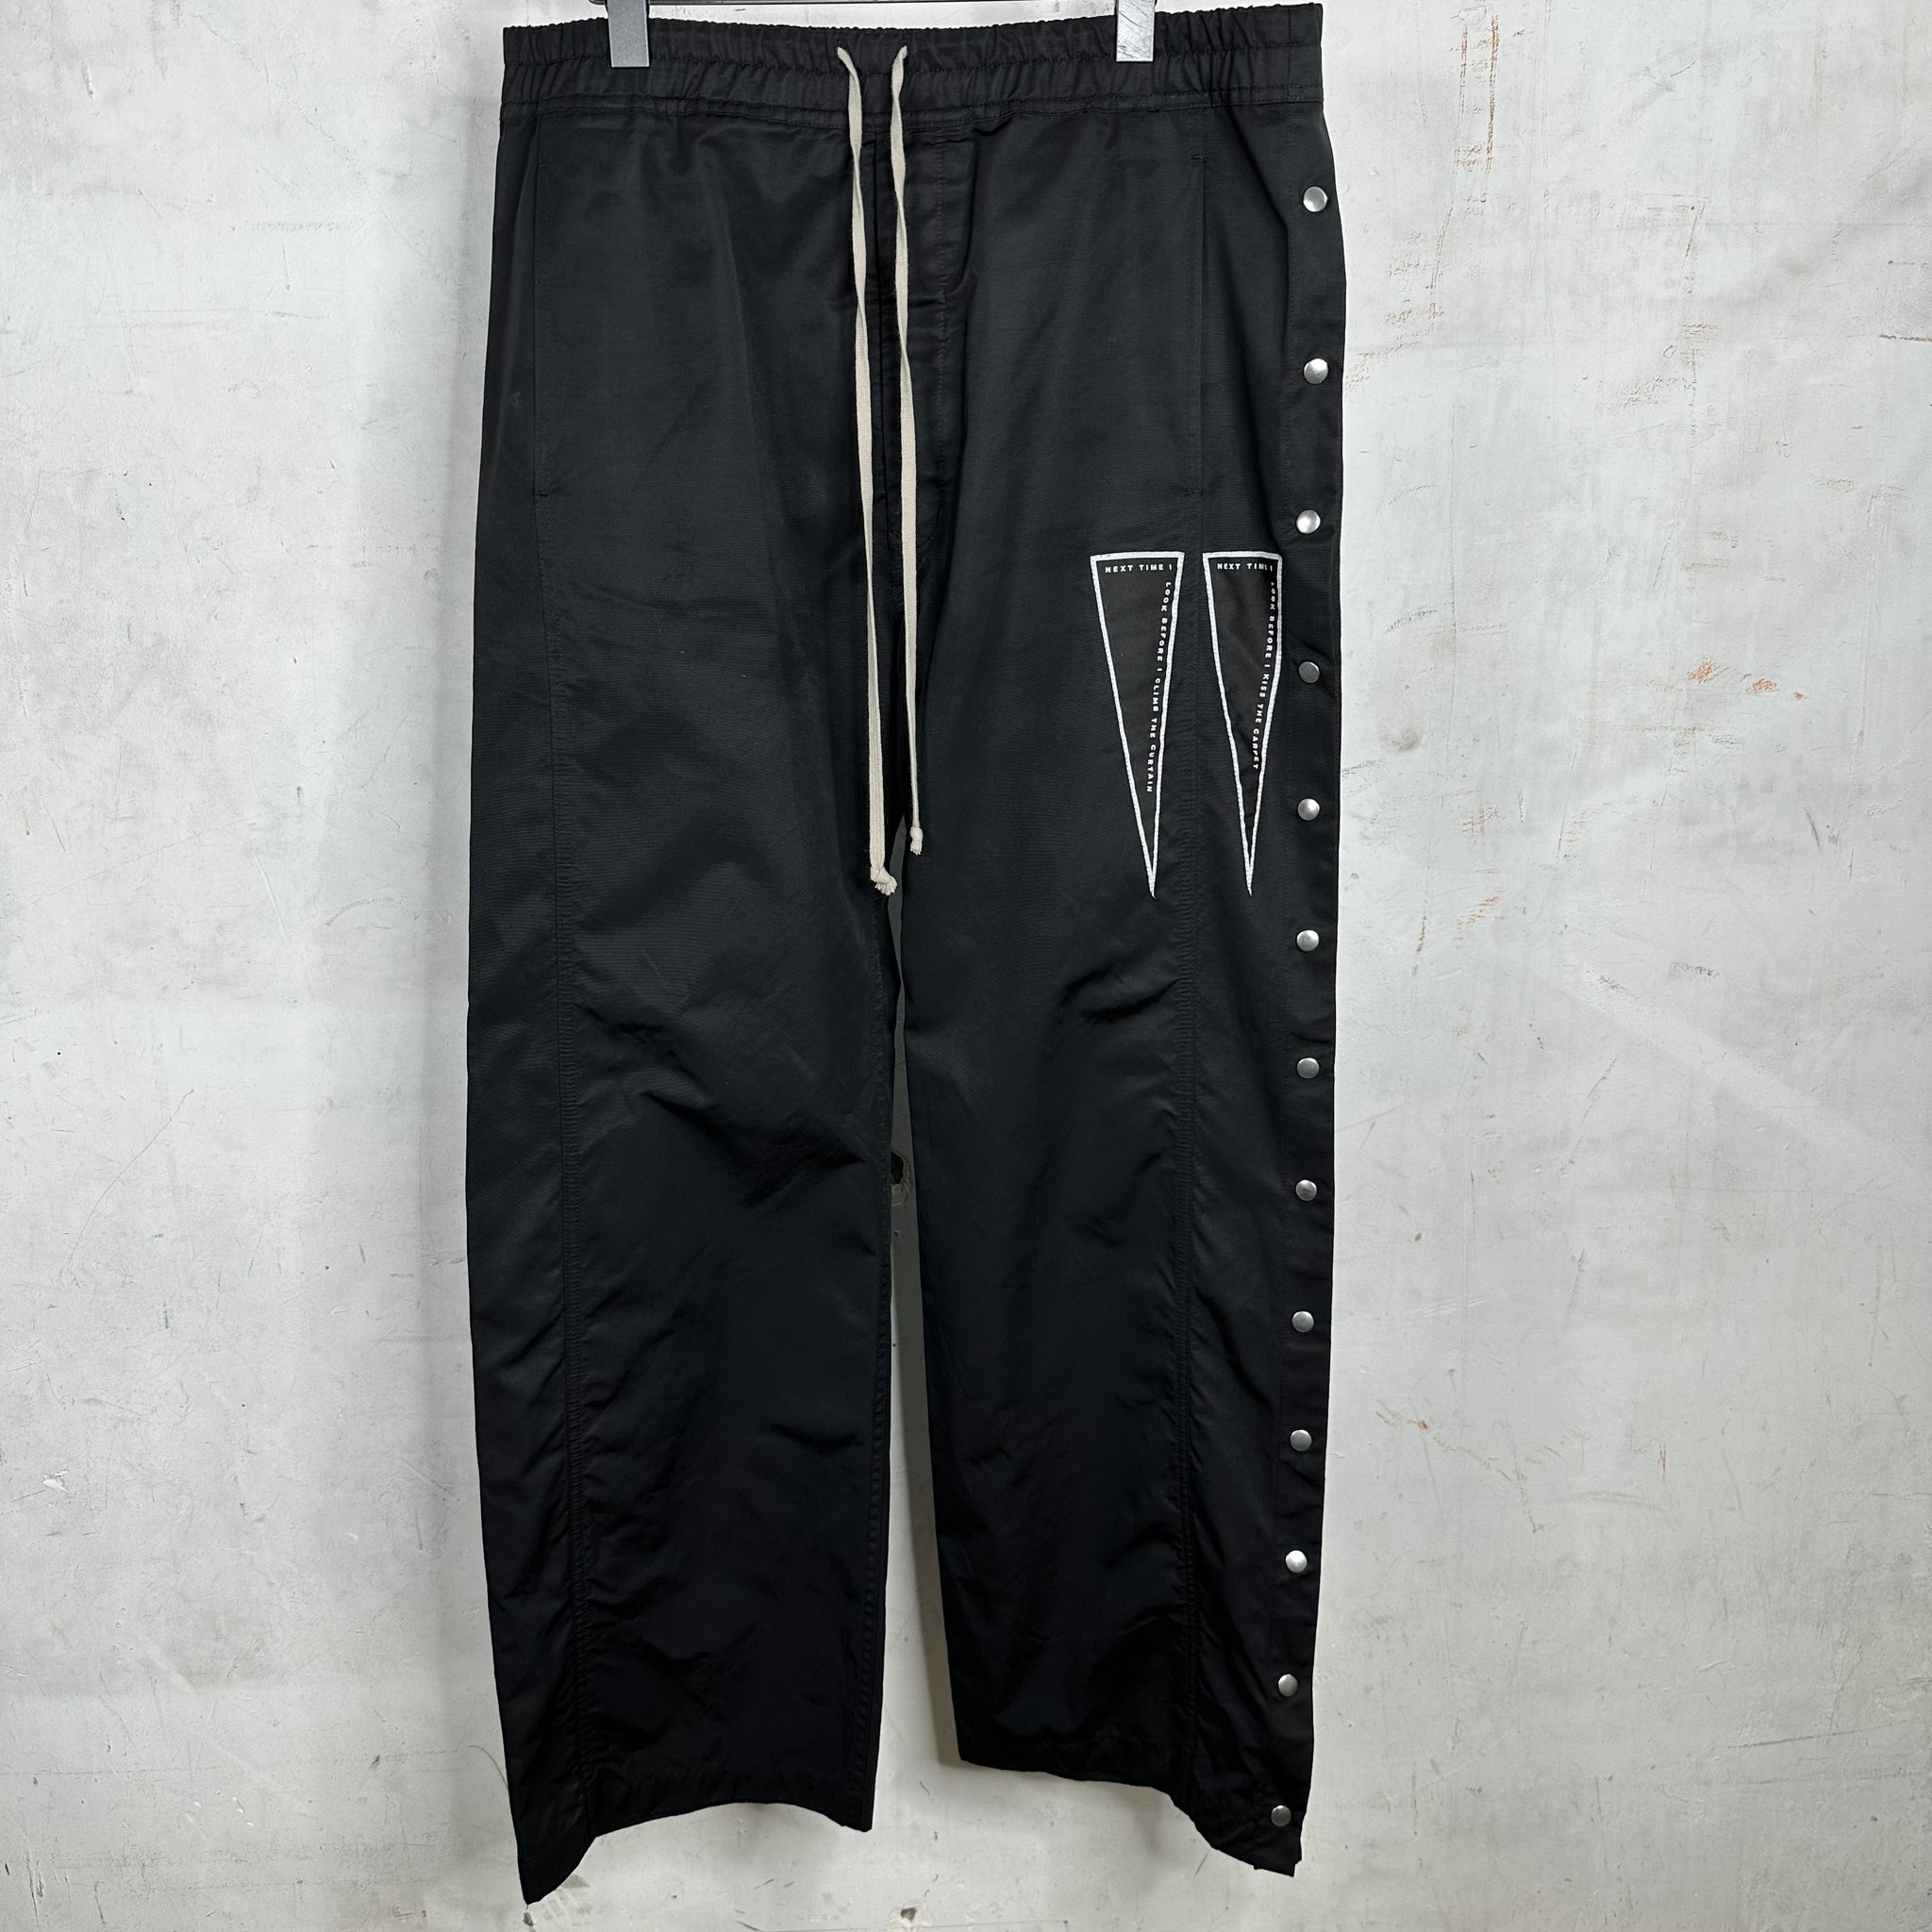 DRKSHDW Graphic Tearaway Pusher Pants